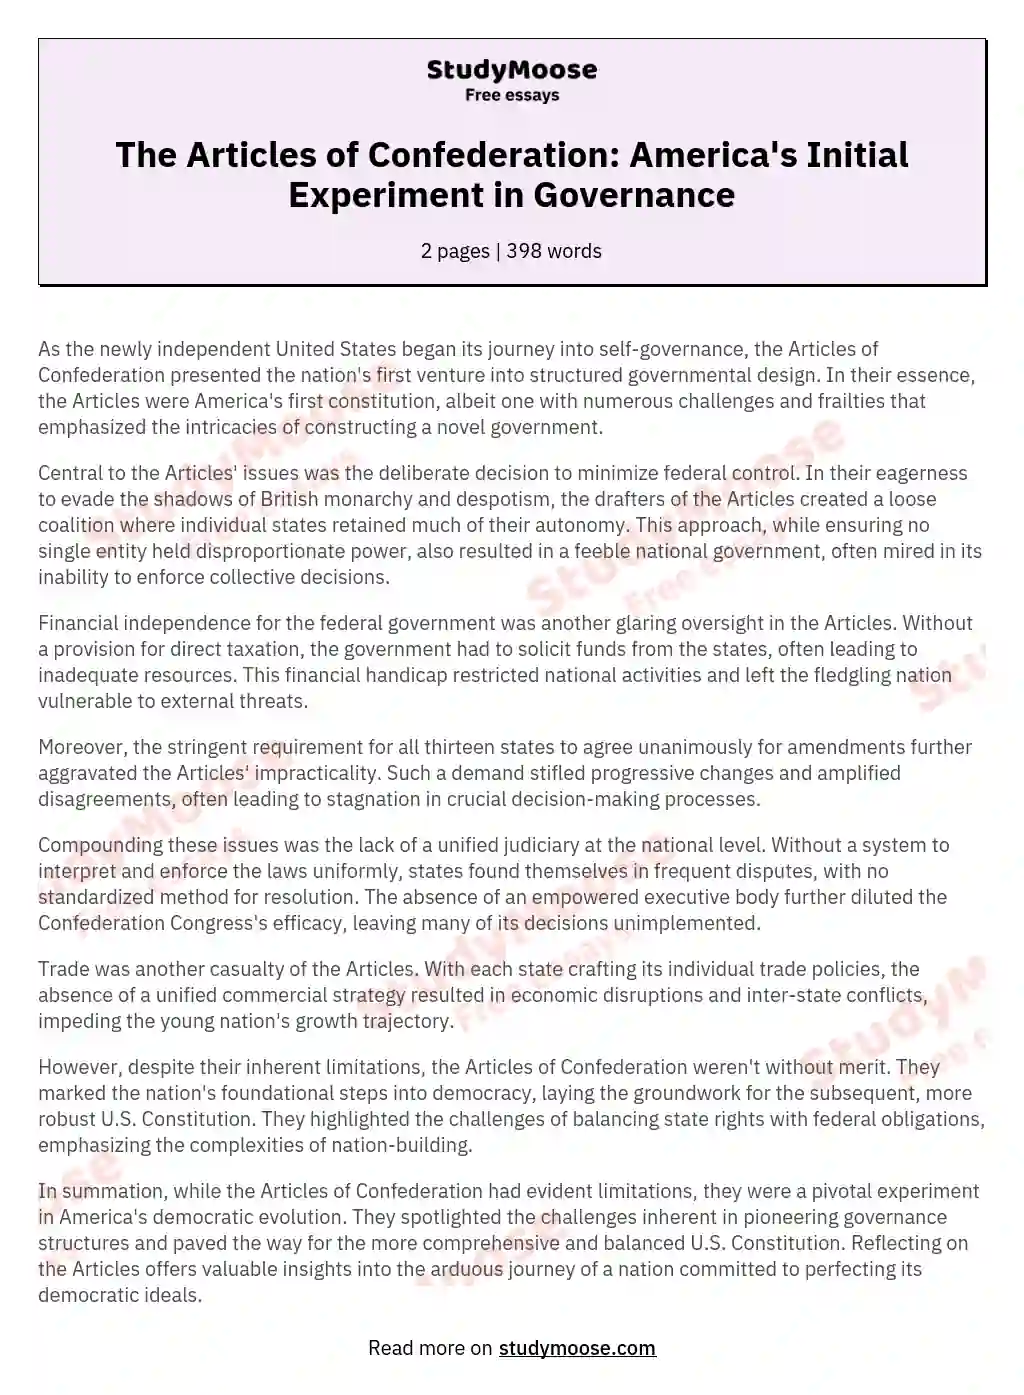 The Articles of Confederation: America's Initial Experiment in Governance essay